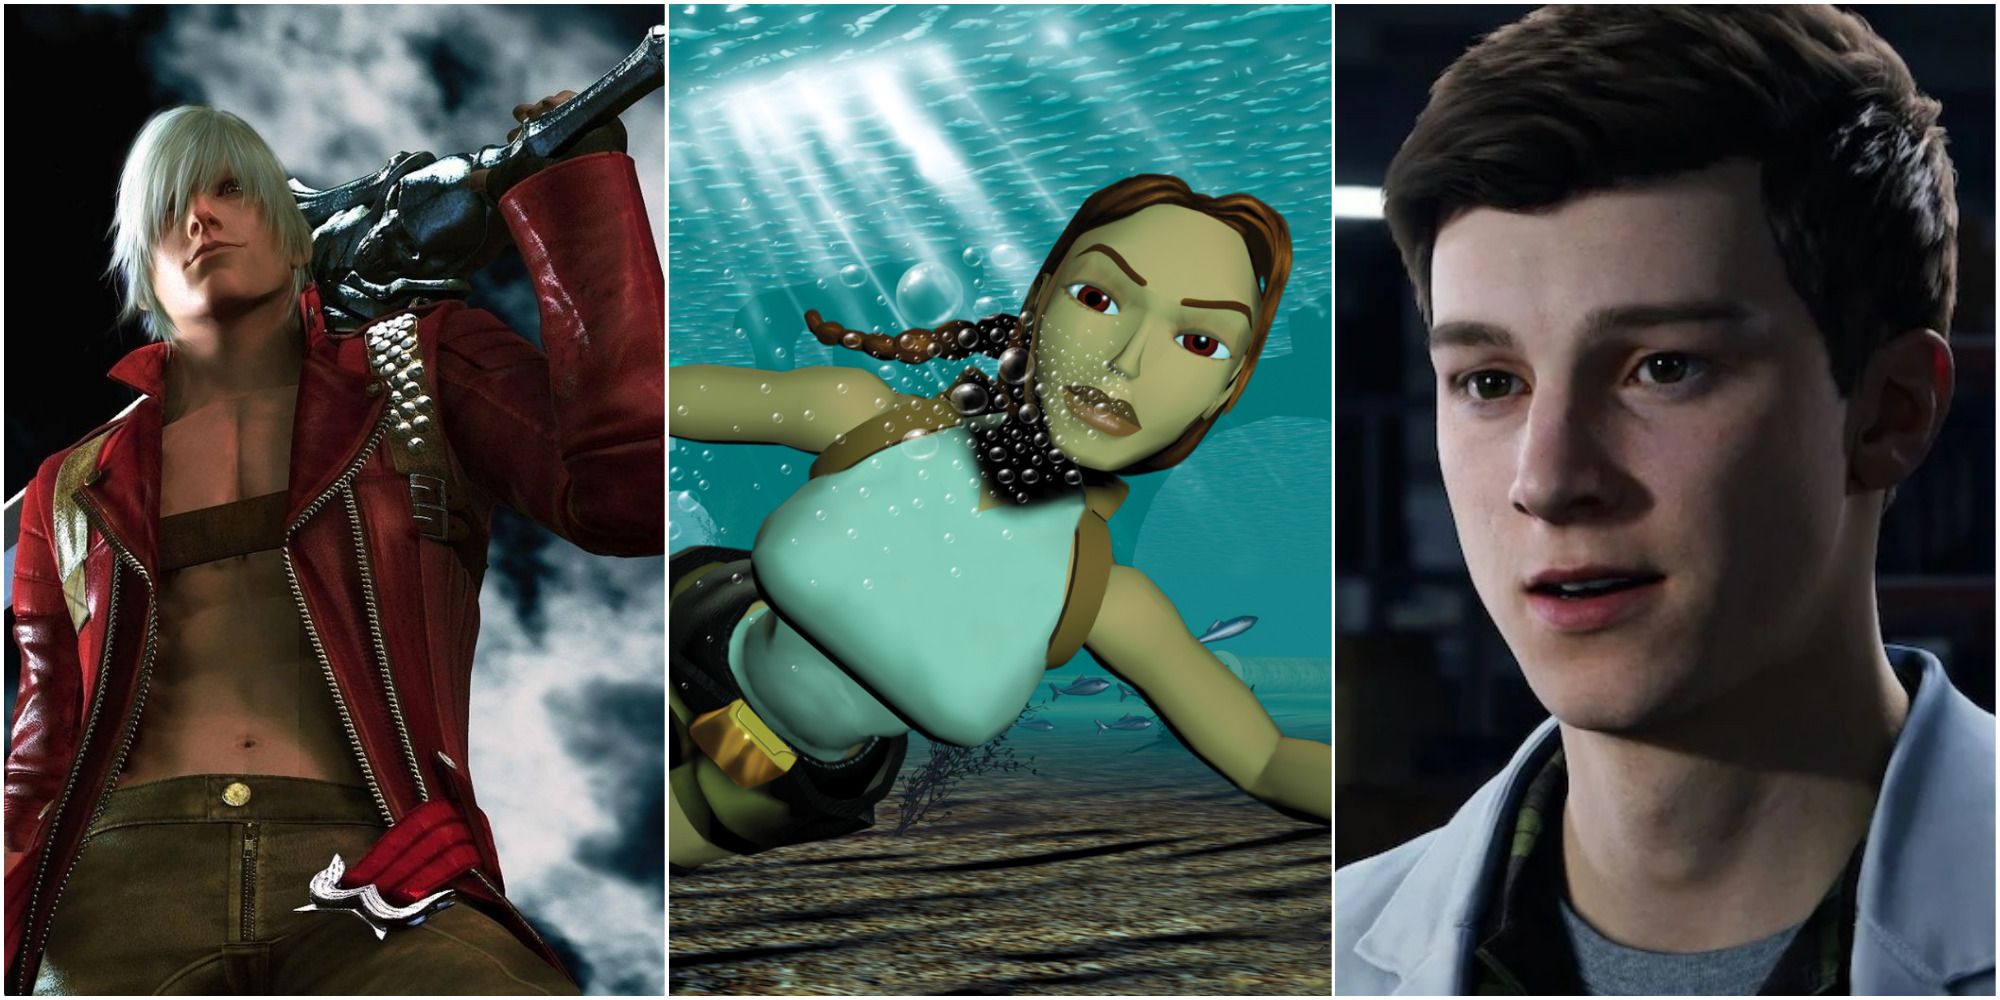 A collage of three Playstation characters who've gotten redesigns: Dante from Devil May Cry, Lara Croft from Tomb Raider, and Peter Parker from Marvel's Spider-Man